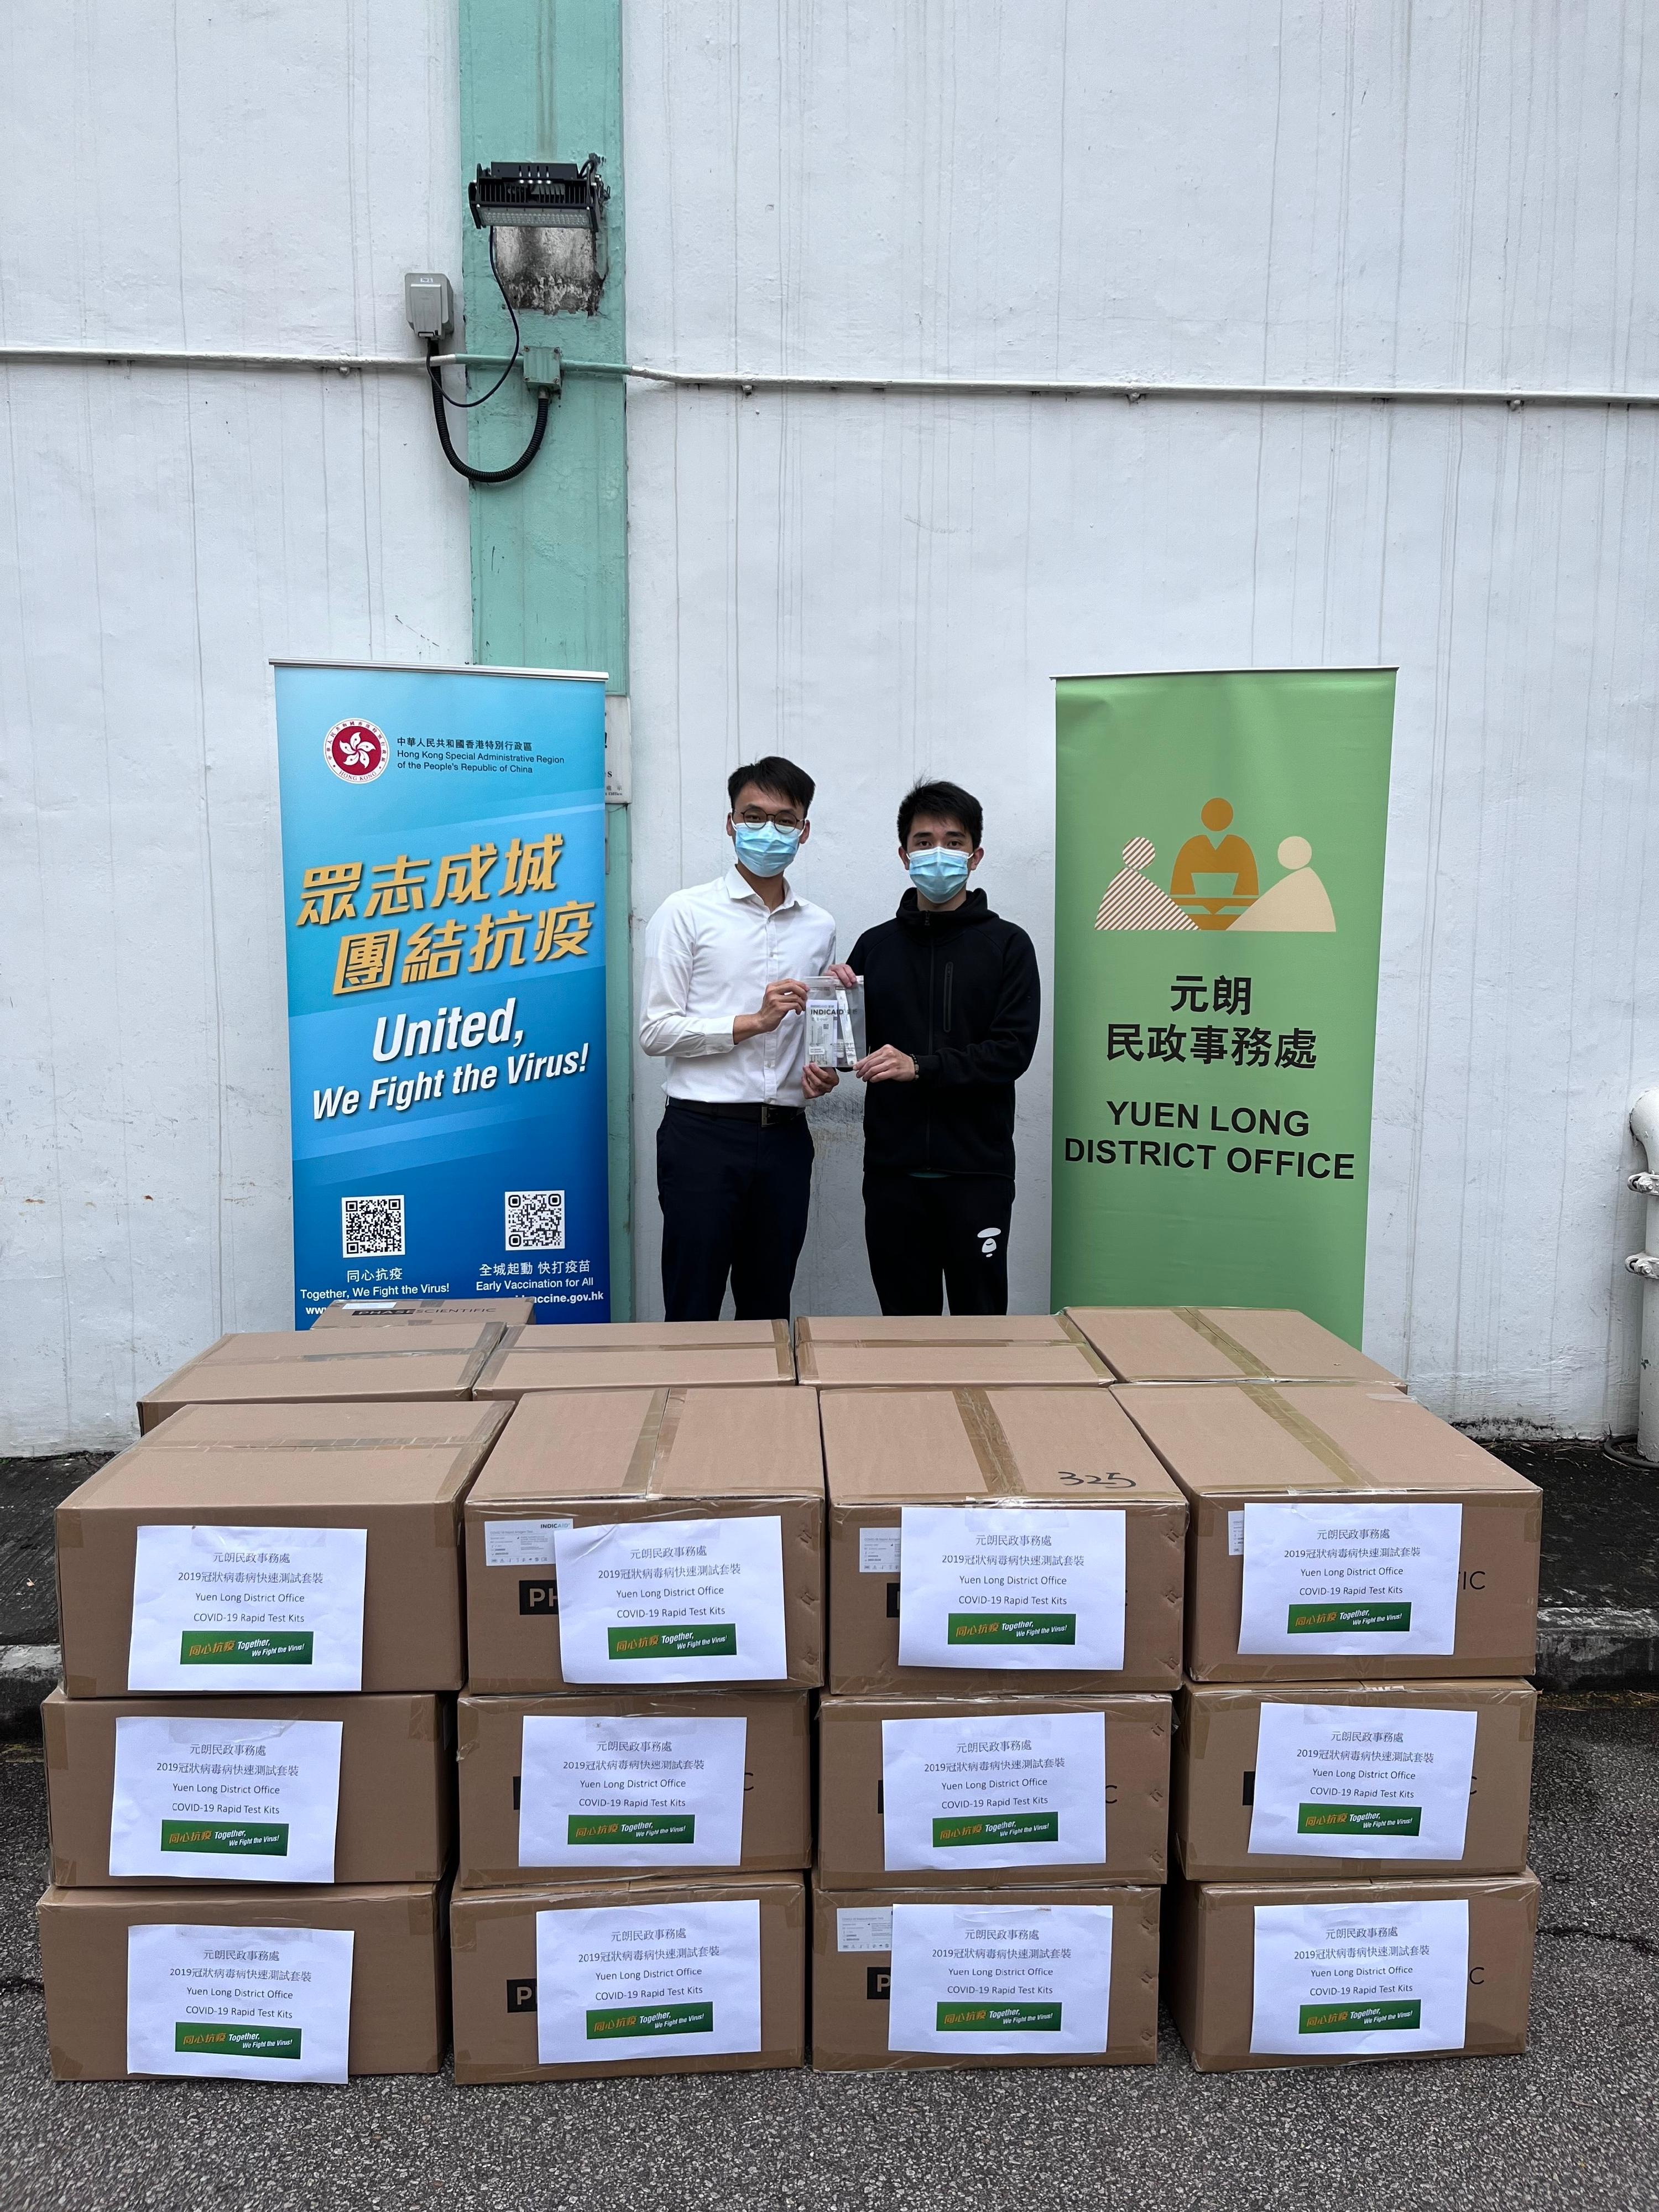 The Yuen Long District Office today (April 20) distributed COVID-19 rapid test kits to households, cleansing workers and property management staff living and working in Long Shin Estate for voluntary testing through the property management company.